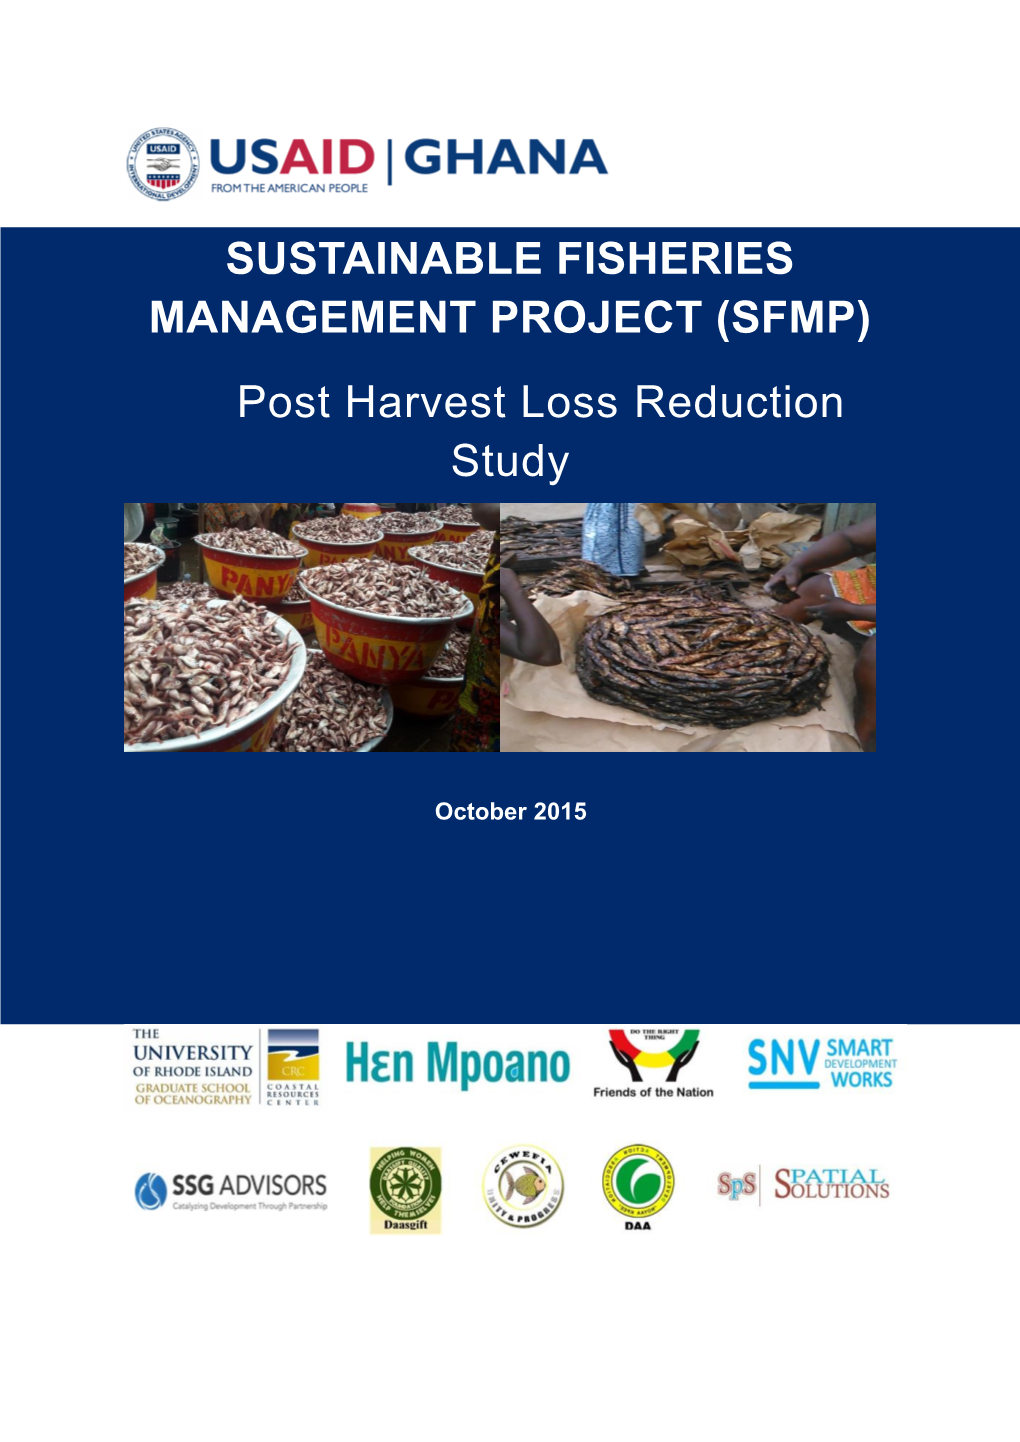 Post Harvesting Loss Reduction Study Report. the USAID/Ghana Sustainable Fisheries Management Project (SFMP)